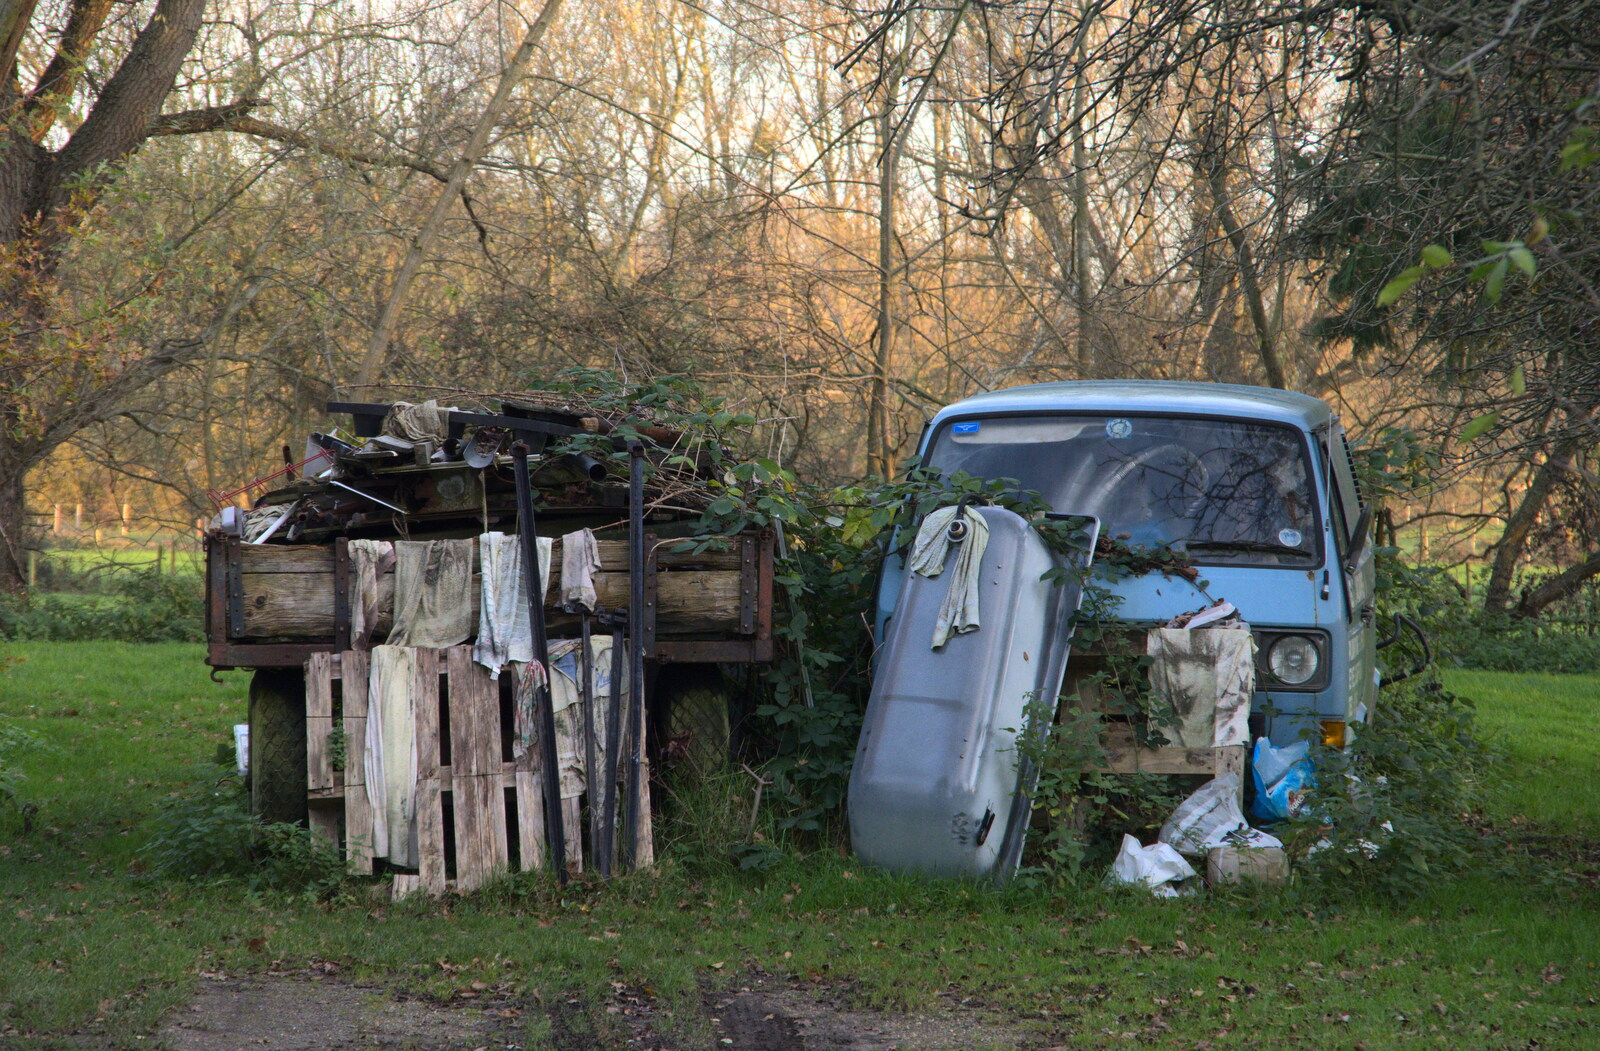 There's a derelict Volkswagen Transporter van from The Dereliction of Eye, Suffolk - 22nd November 2020